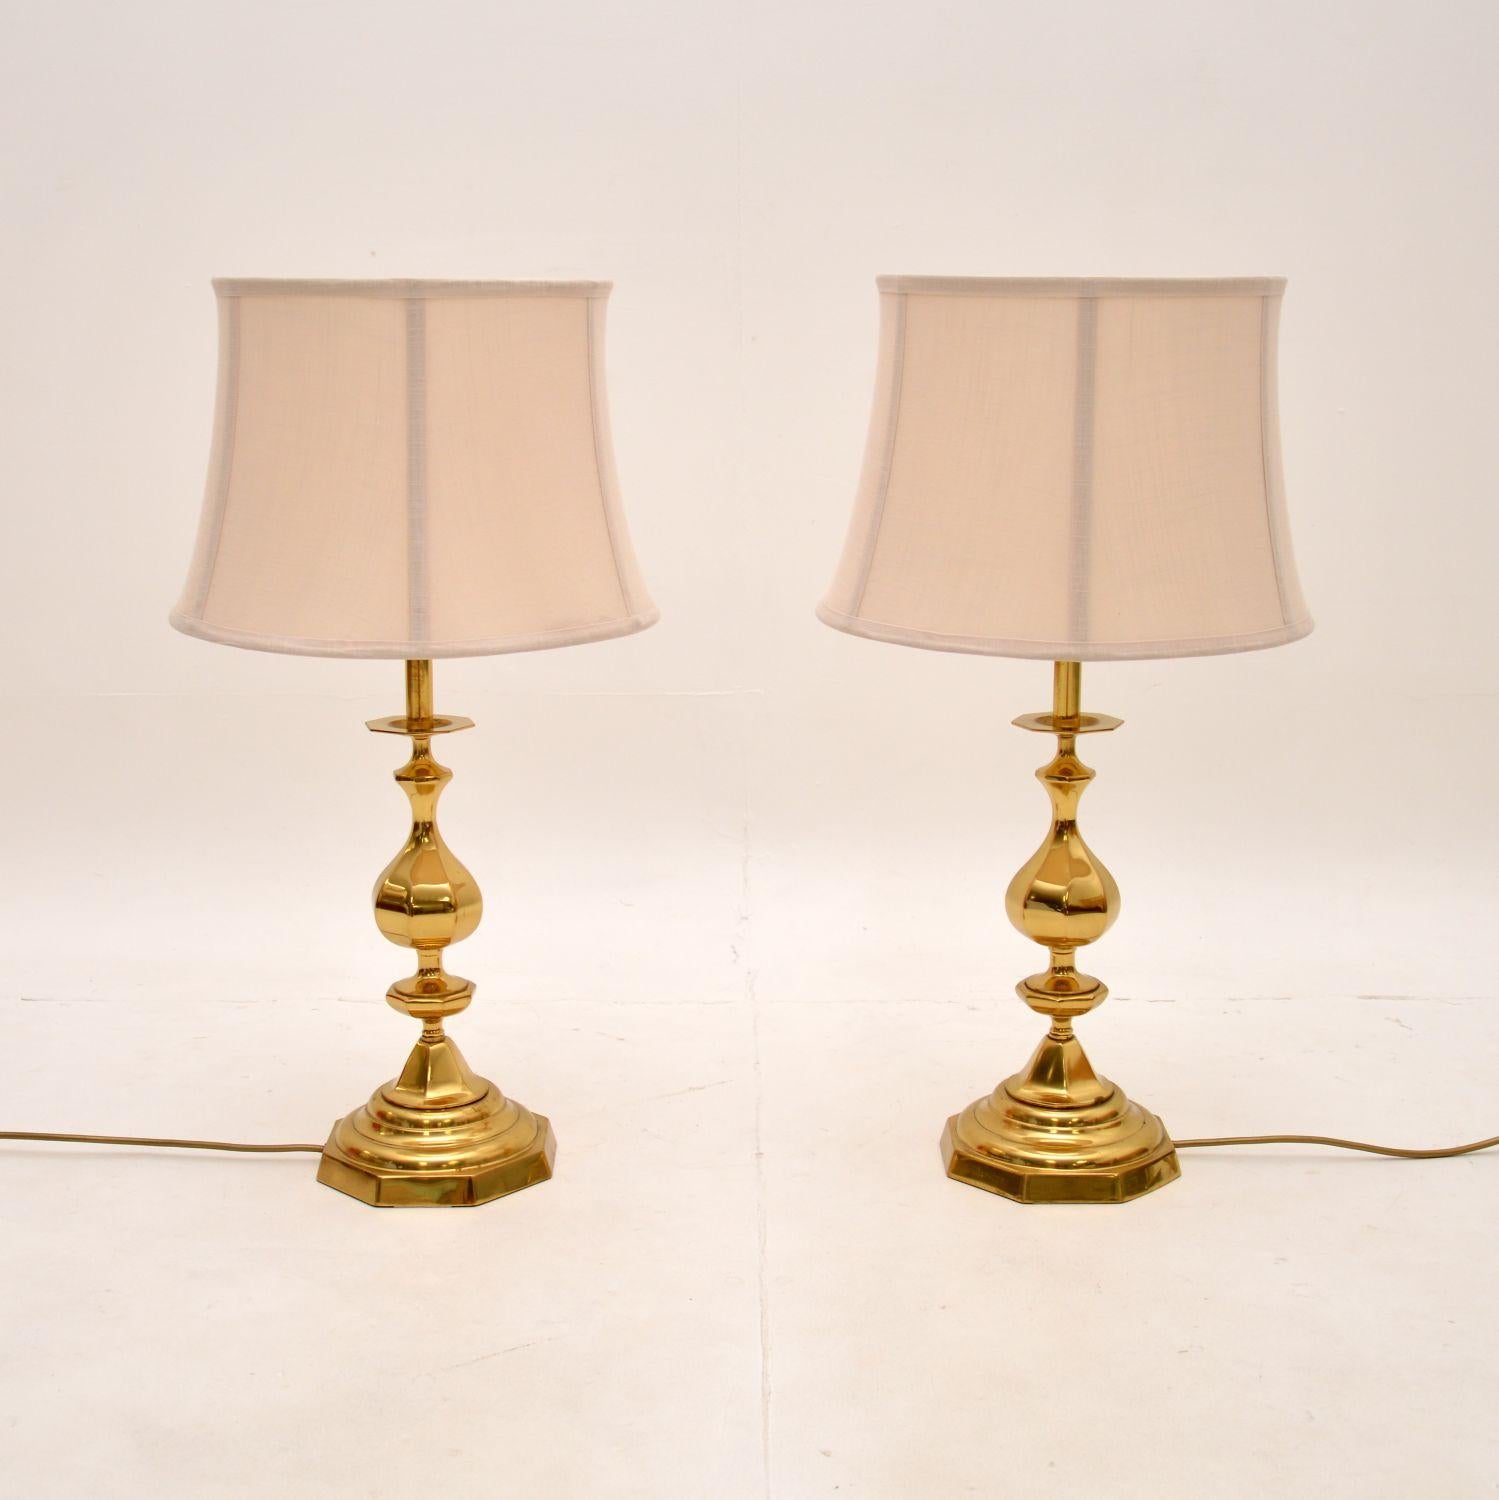 A large and impressive pair of vintage brass table lamps. They were made in England, they date from around the 1970’s.

They are very stylish and are a substantial size. The quality is fantastic, they are solid brass and have a gorgeous design.

We